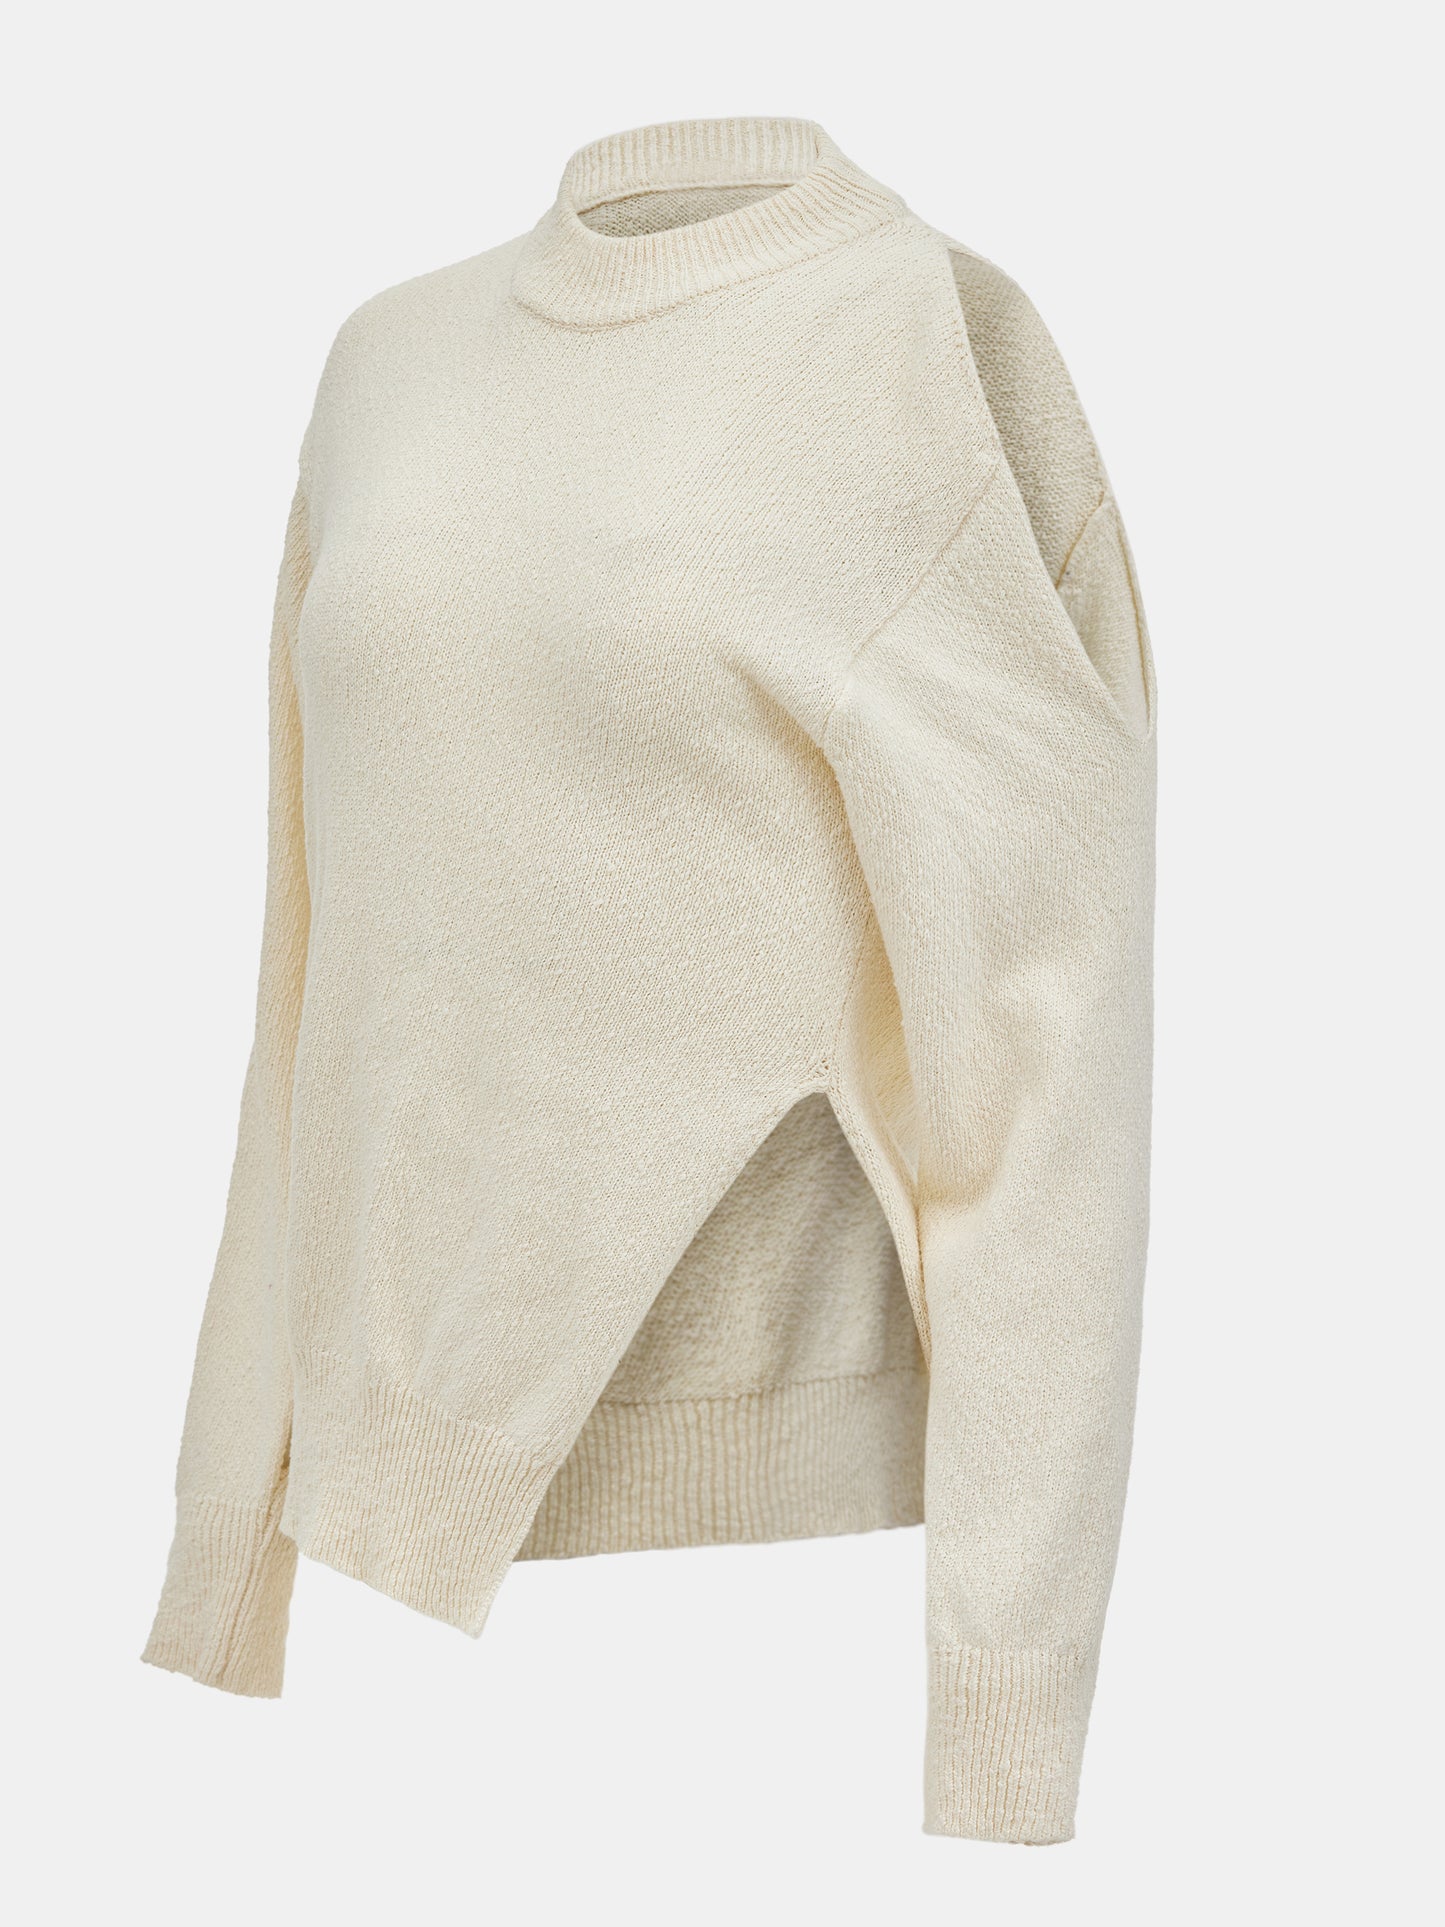 Cut-Out Boucle Pullover, Cream